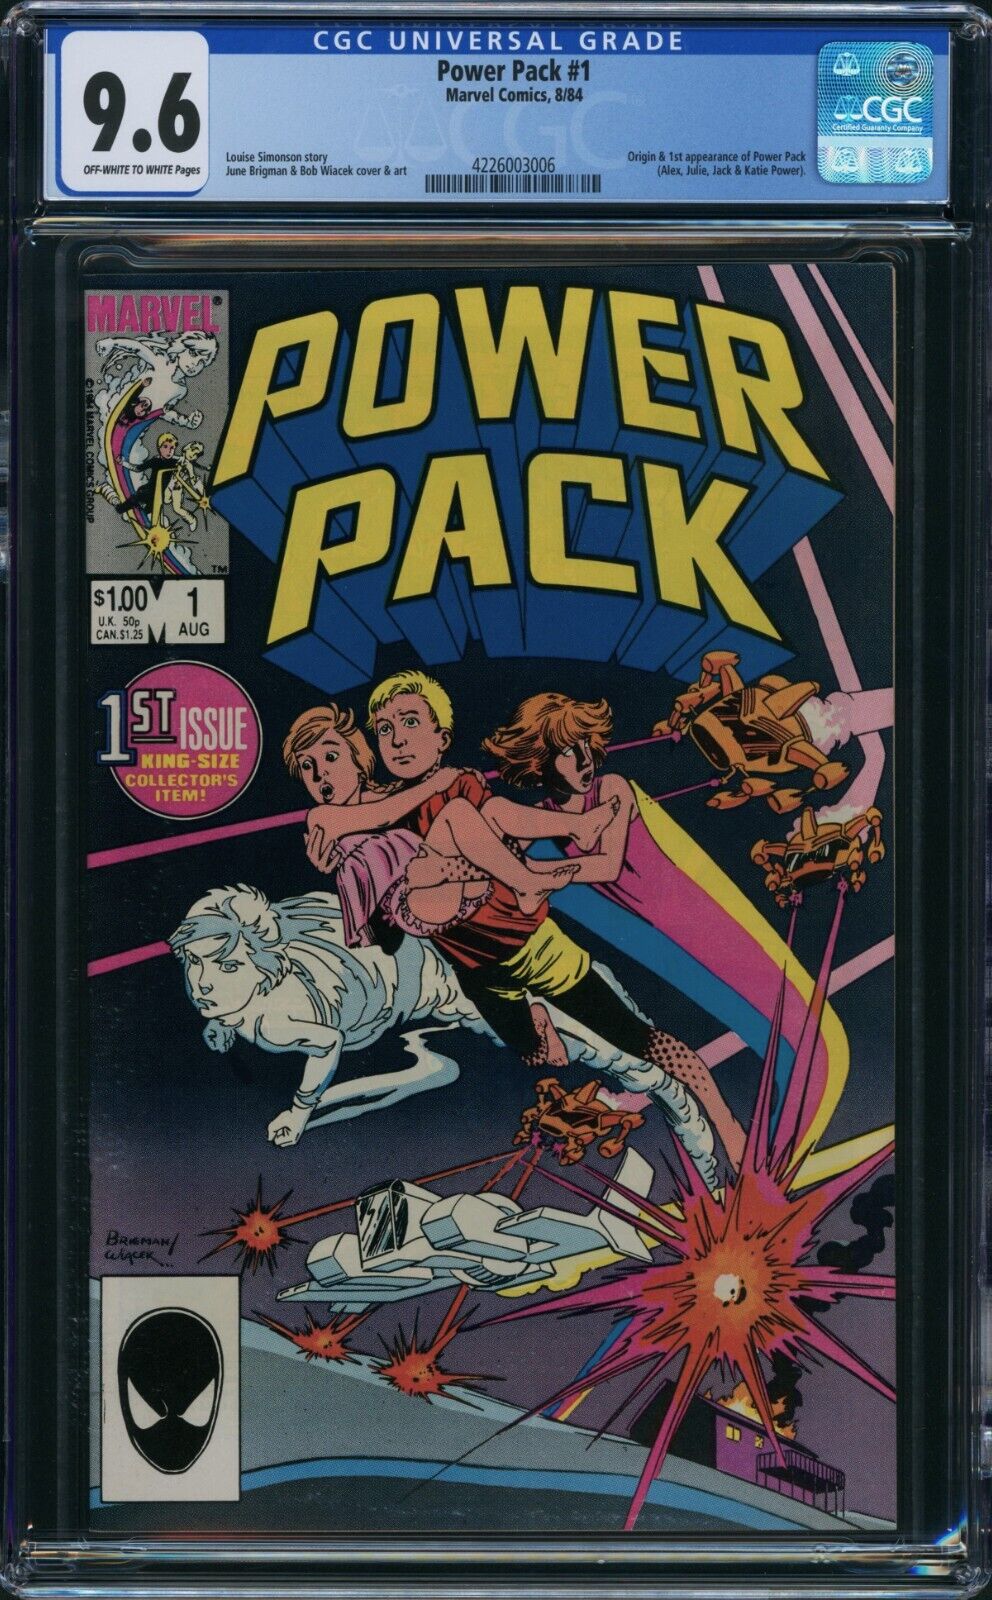 Power Pack #1 (Marvel Comics, 1984) CGC 9.6 - 1st appearance of Power Pack